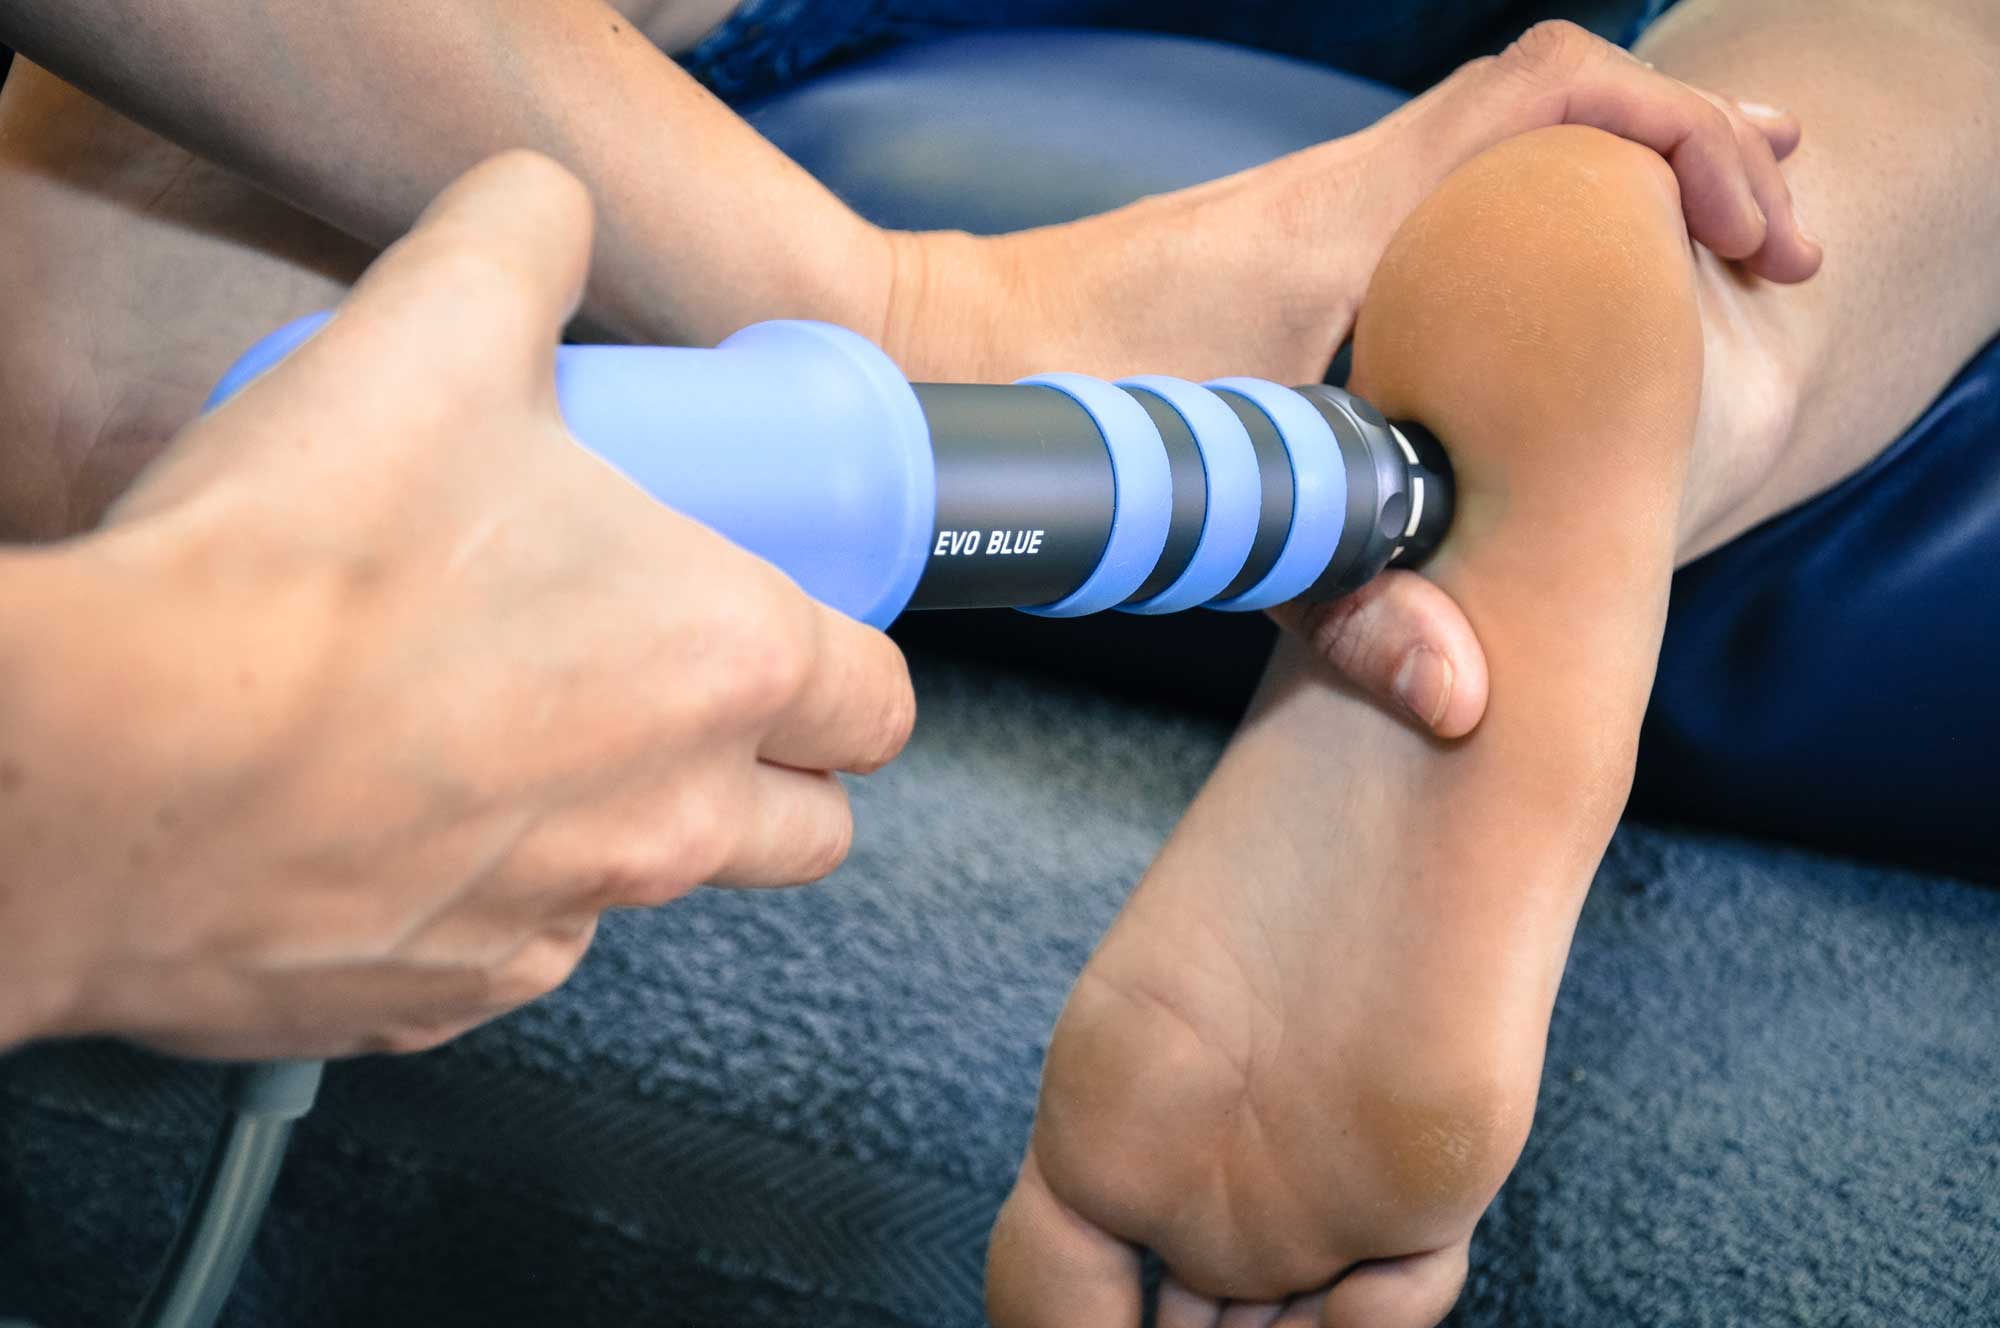 Square One - Shockwave Therapy: Image showing practitioner using shockwave therapy on foot of a patient